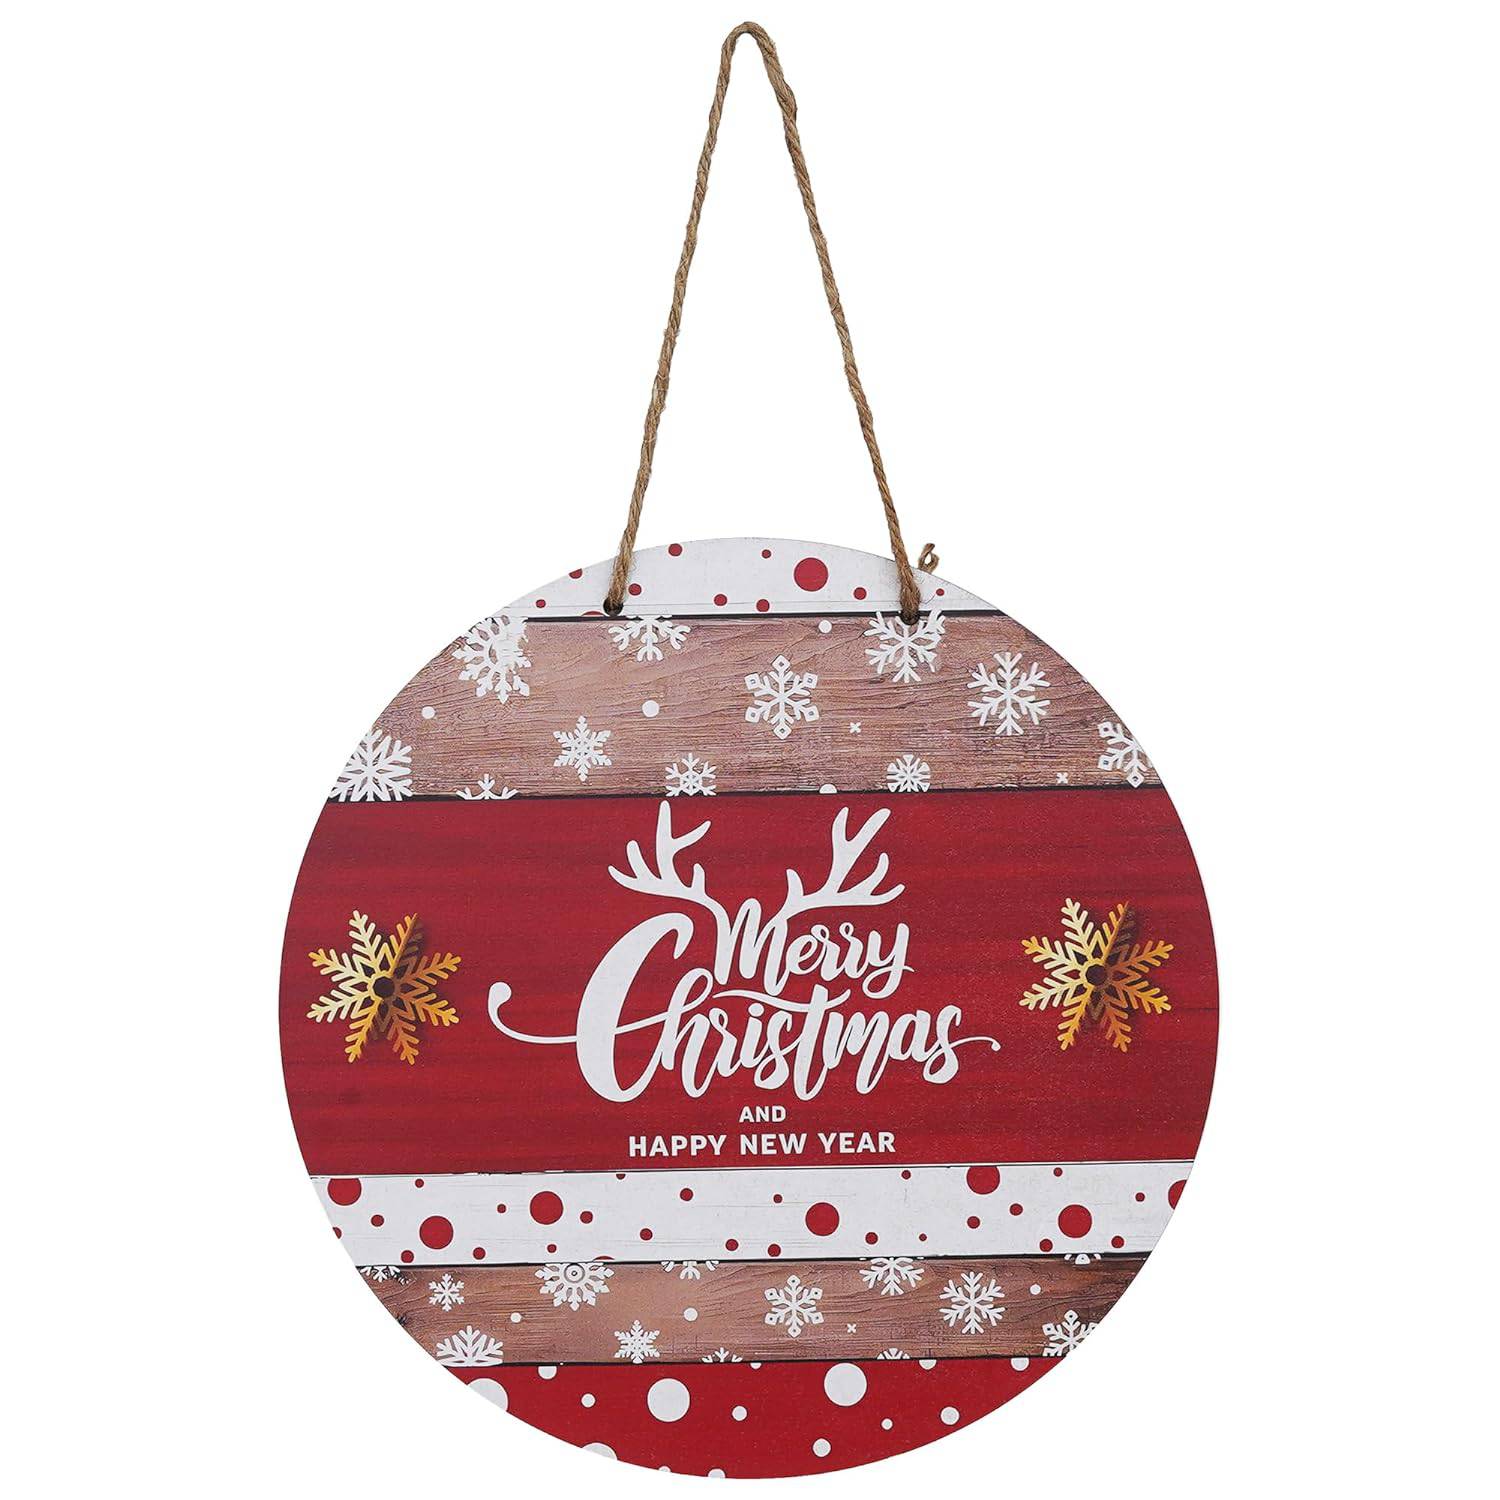 Premium Merry Christmas Printed Wall Hanging/Door Hanging for Home and Office Decor Christmas Decorations Items (Wood Color_14.5 inches) - YuvaFlowers